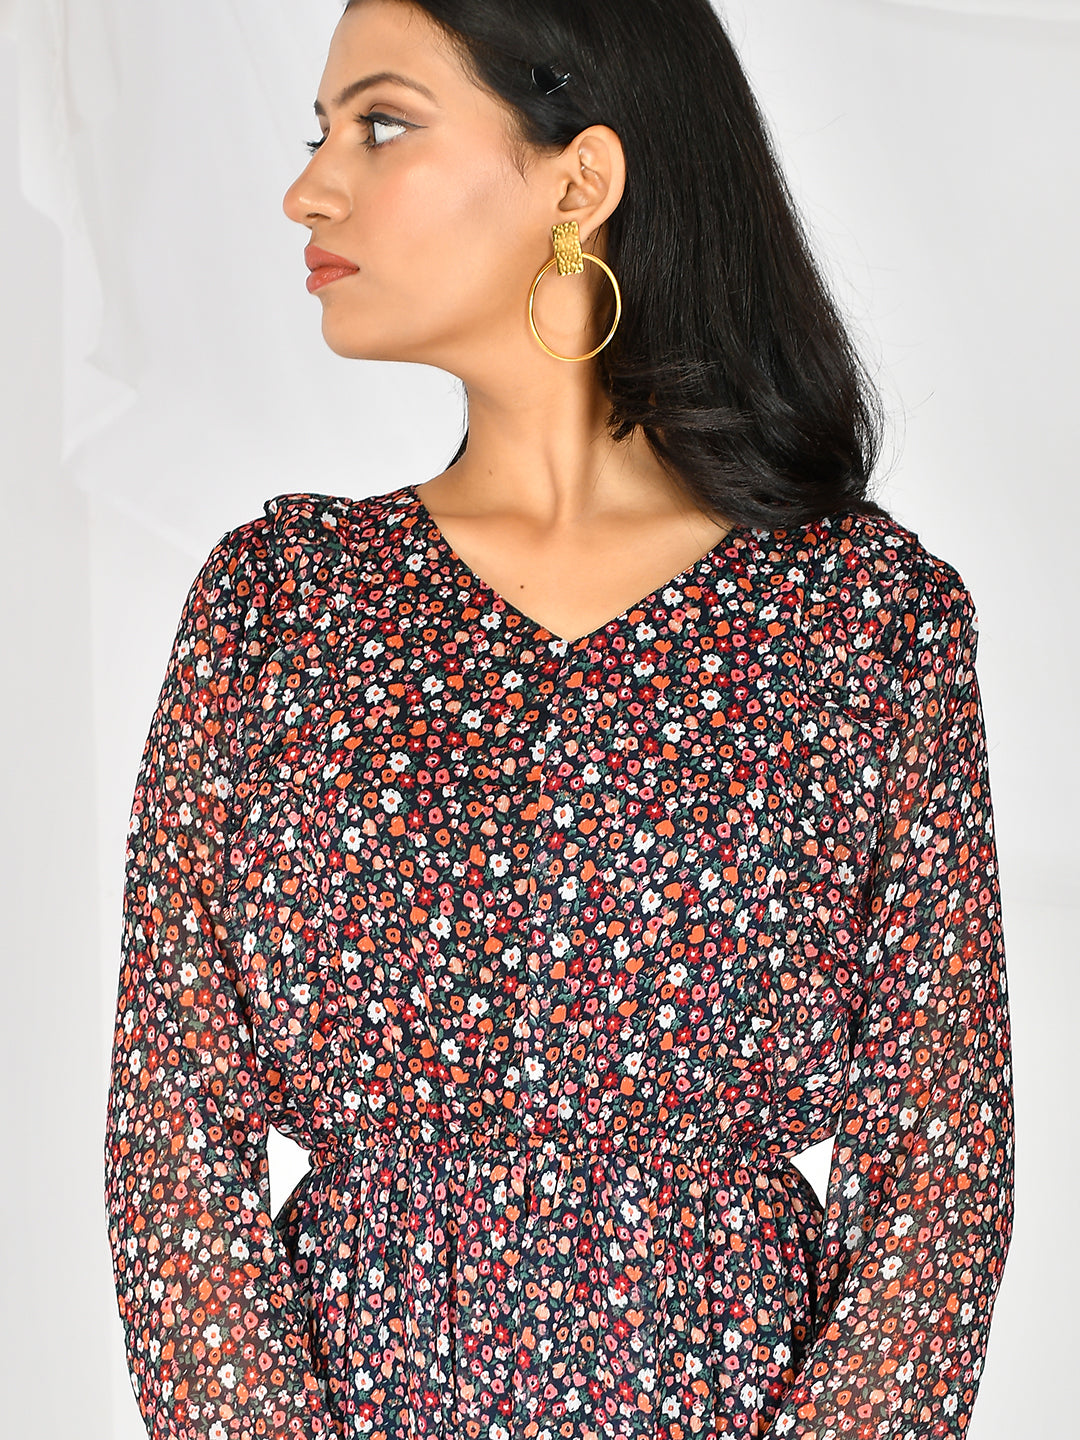 Flaunt your style with the Floral Printed V-Neck Knee Length Western Dress. The delicate floral print and v-neck design add a touch of femininity to this dress, making it the perfect choice for any occasion. Its knee-length cut ensures a flattering fit while keeping you comfortable all day long.